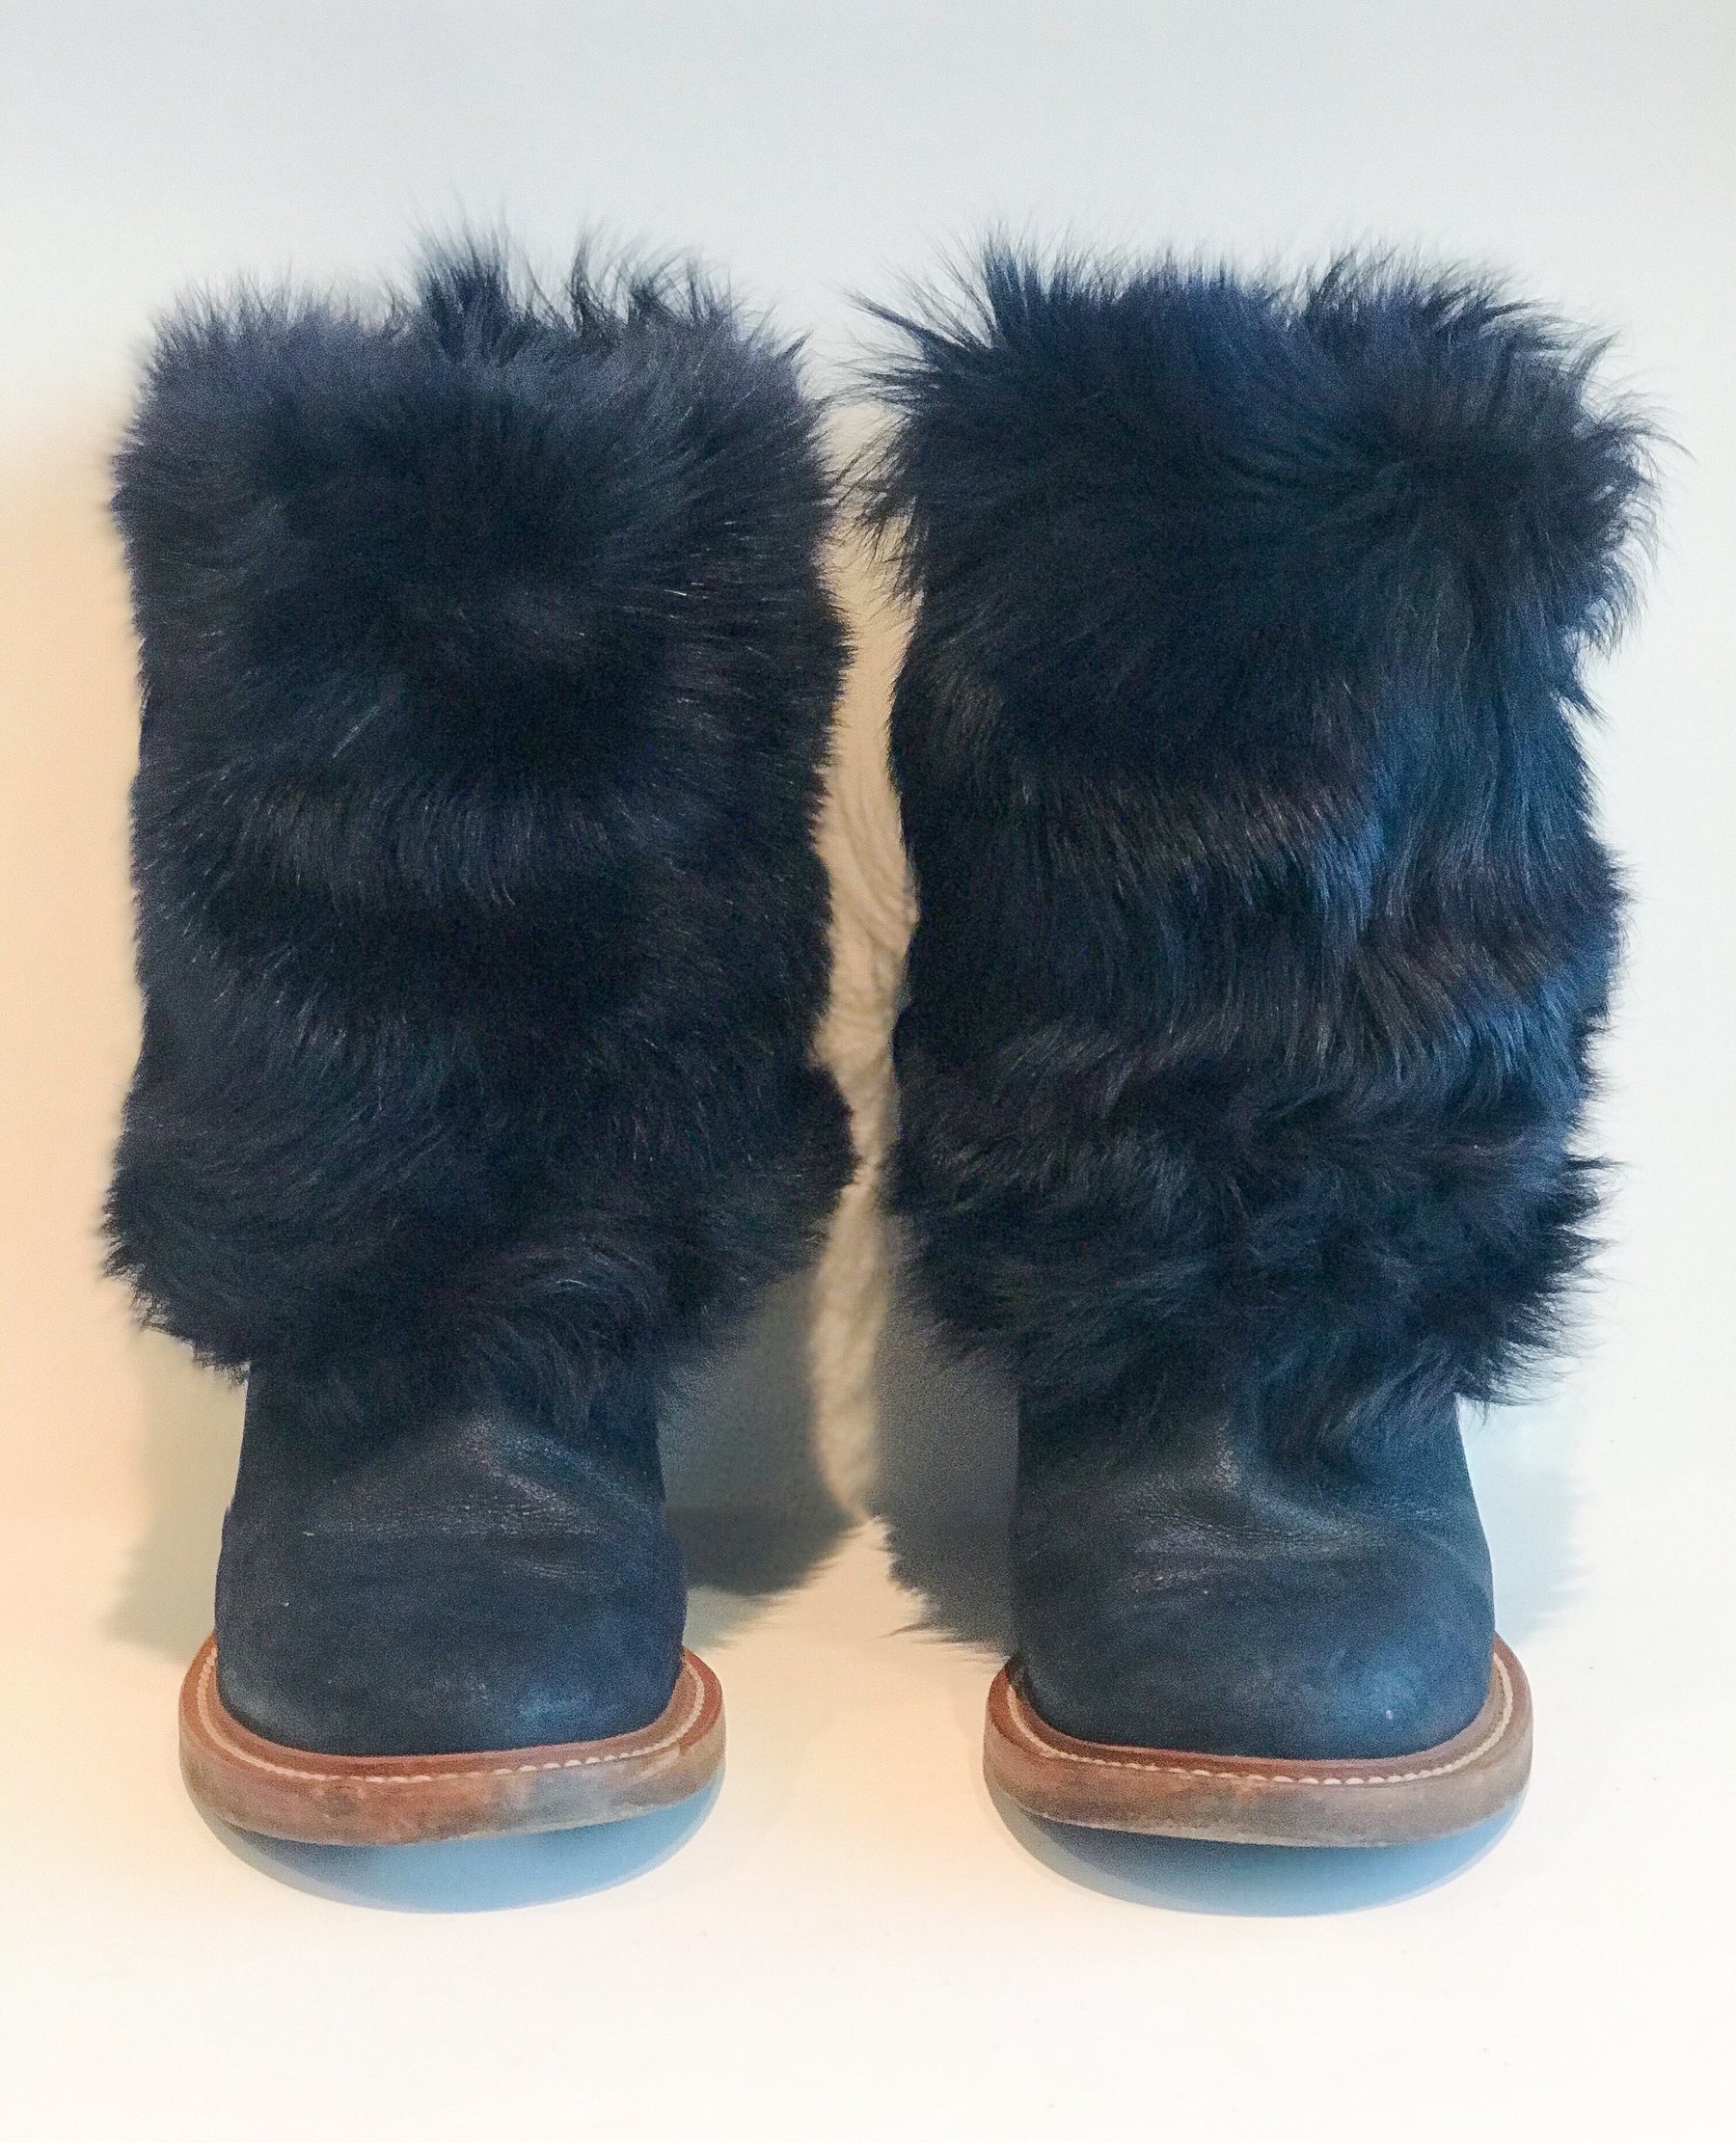 Chanel Fur Boots Navy Blue Front of Shoes